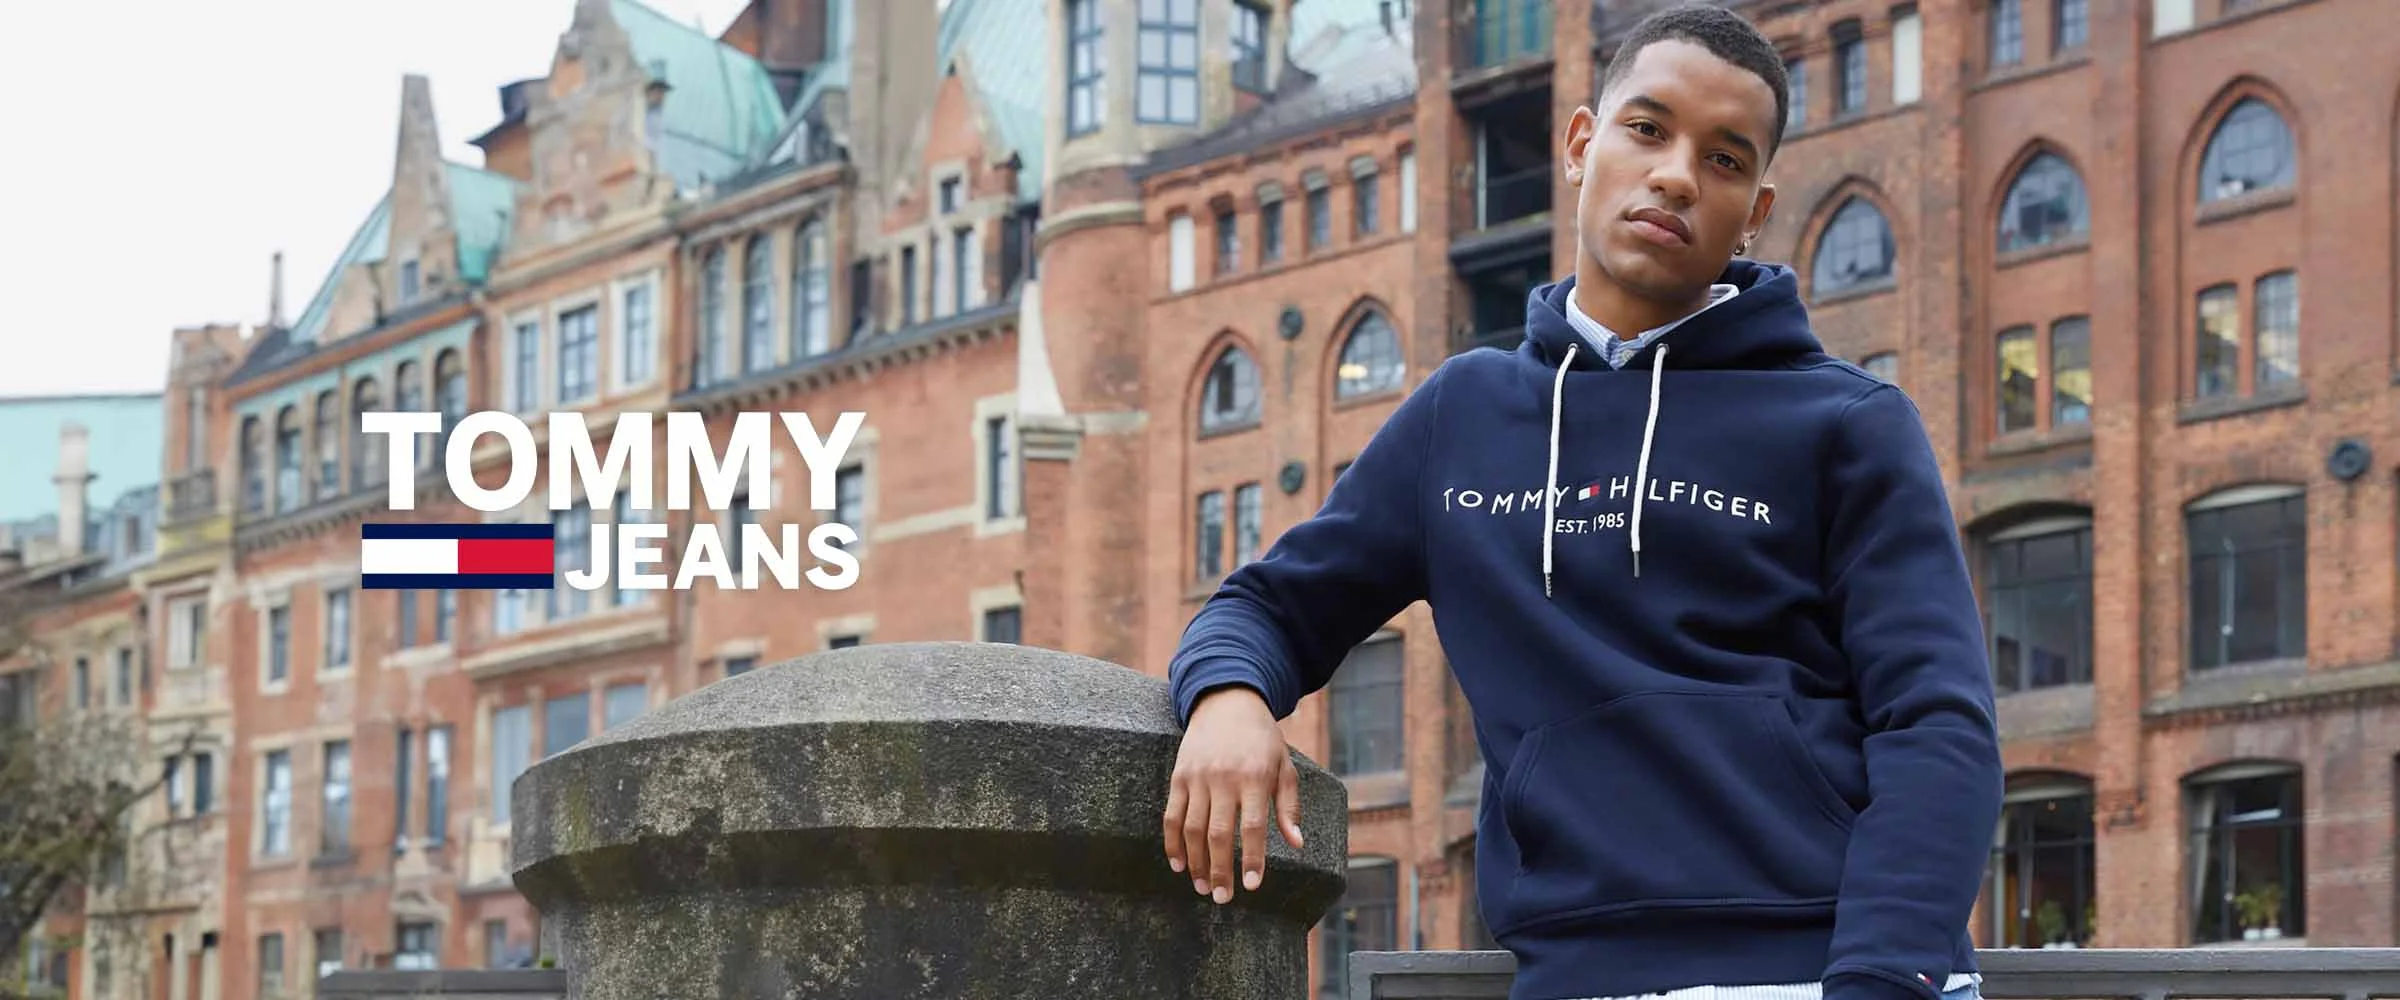 Tommy Jeans truien banner